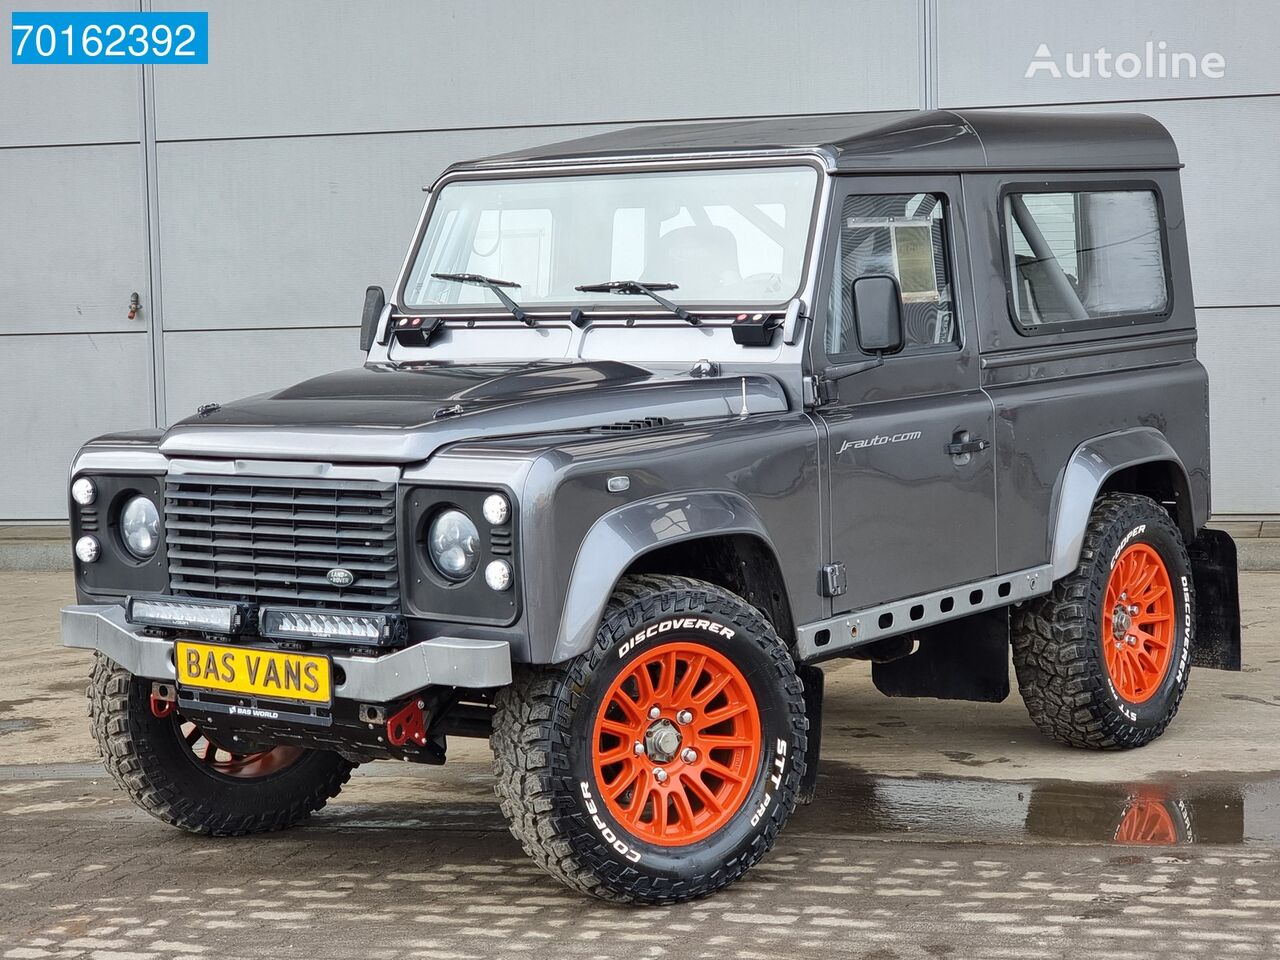 Land Rover Defender 2.2 Bowler Rally Intrax suspension Roll Cage Rolkooi 4x VUD